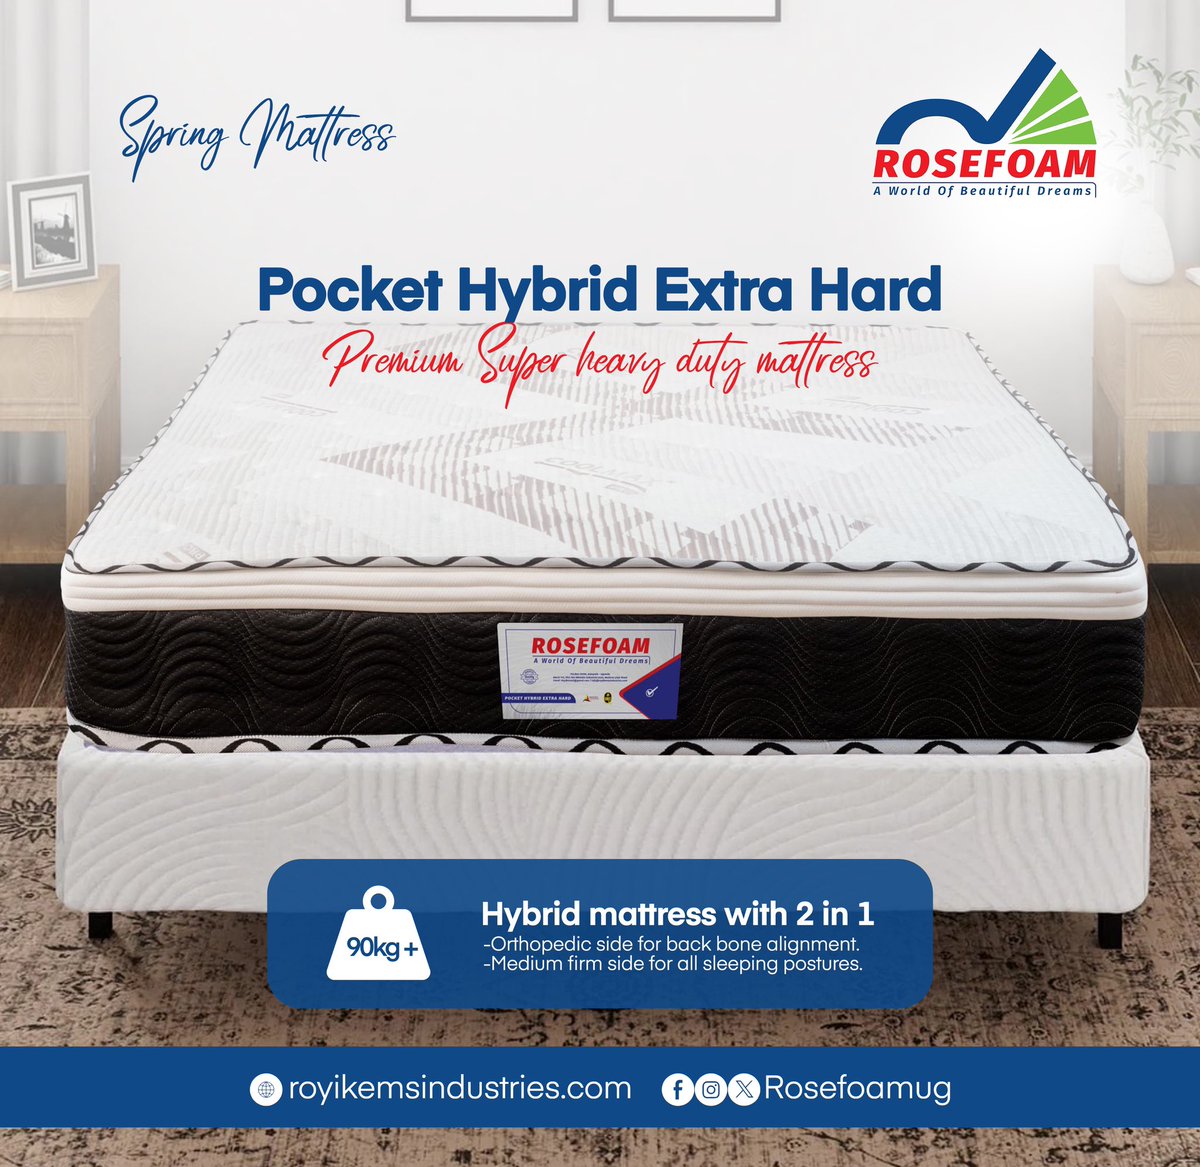 Have you heard about the orthopedic spring mattress? 😅😁😁😁

#rosefoampremiummattresses